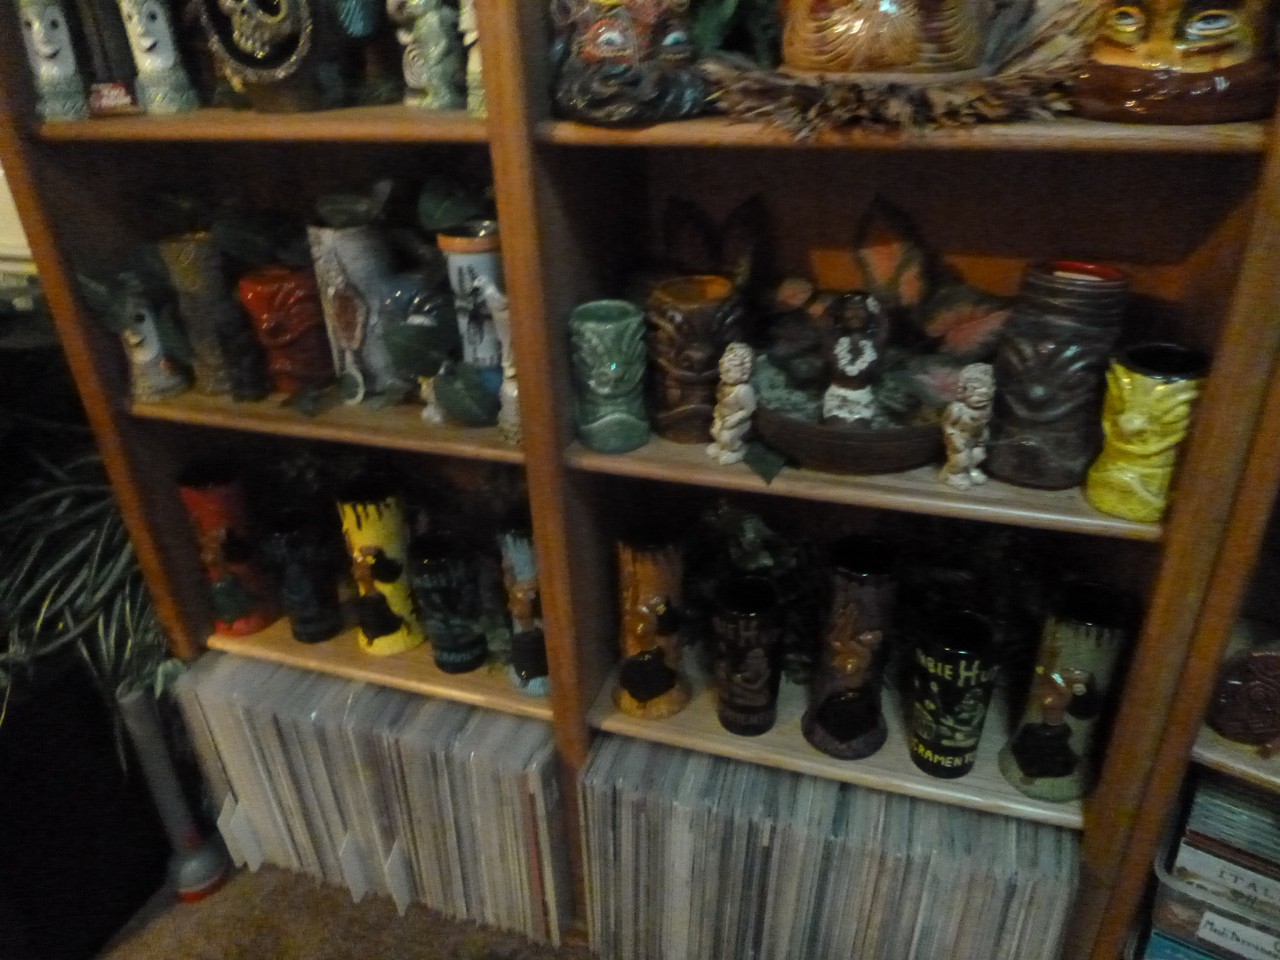 Nook redone and Zombie mugs into jungle room 7 19 23 on fb tc (14)